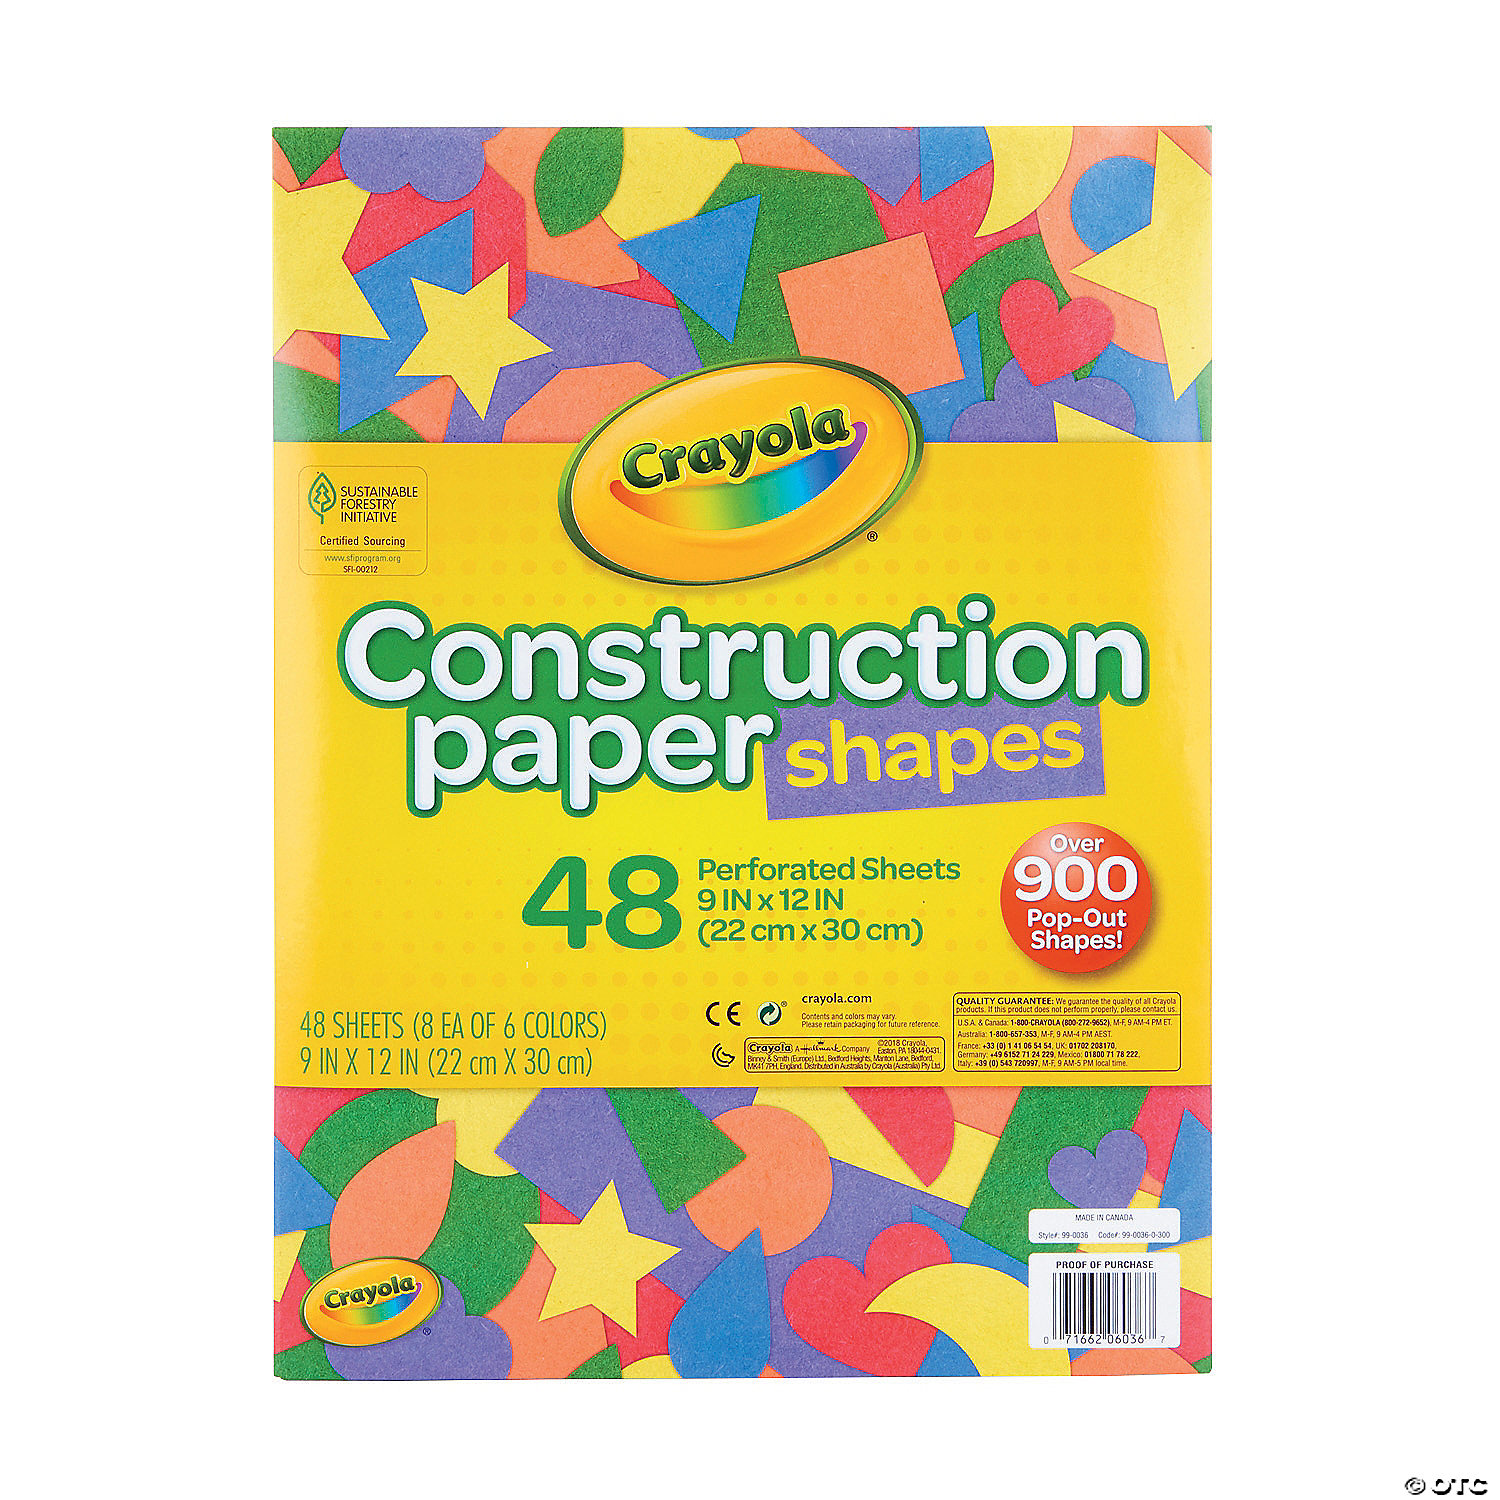 SunWorks Heavyweight Construction Paper Pad, 8 Assorted Colors, 9 x 12,  48 Sheets Per Pack, 12 Packs